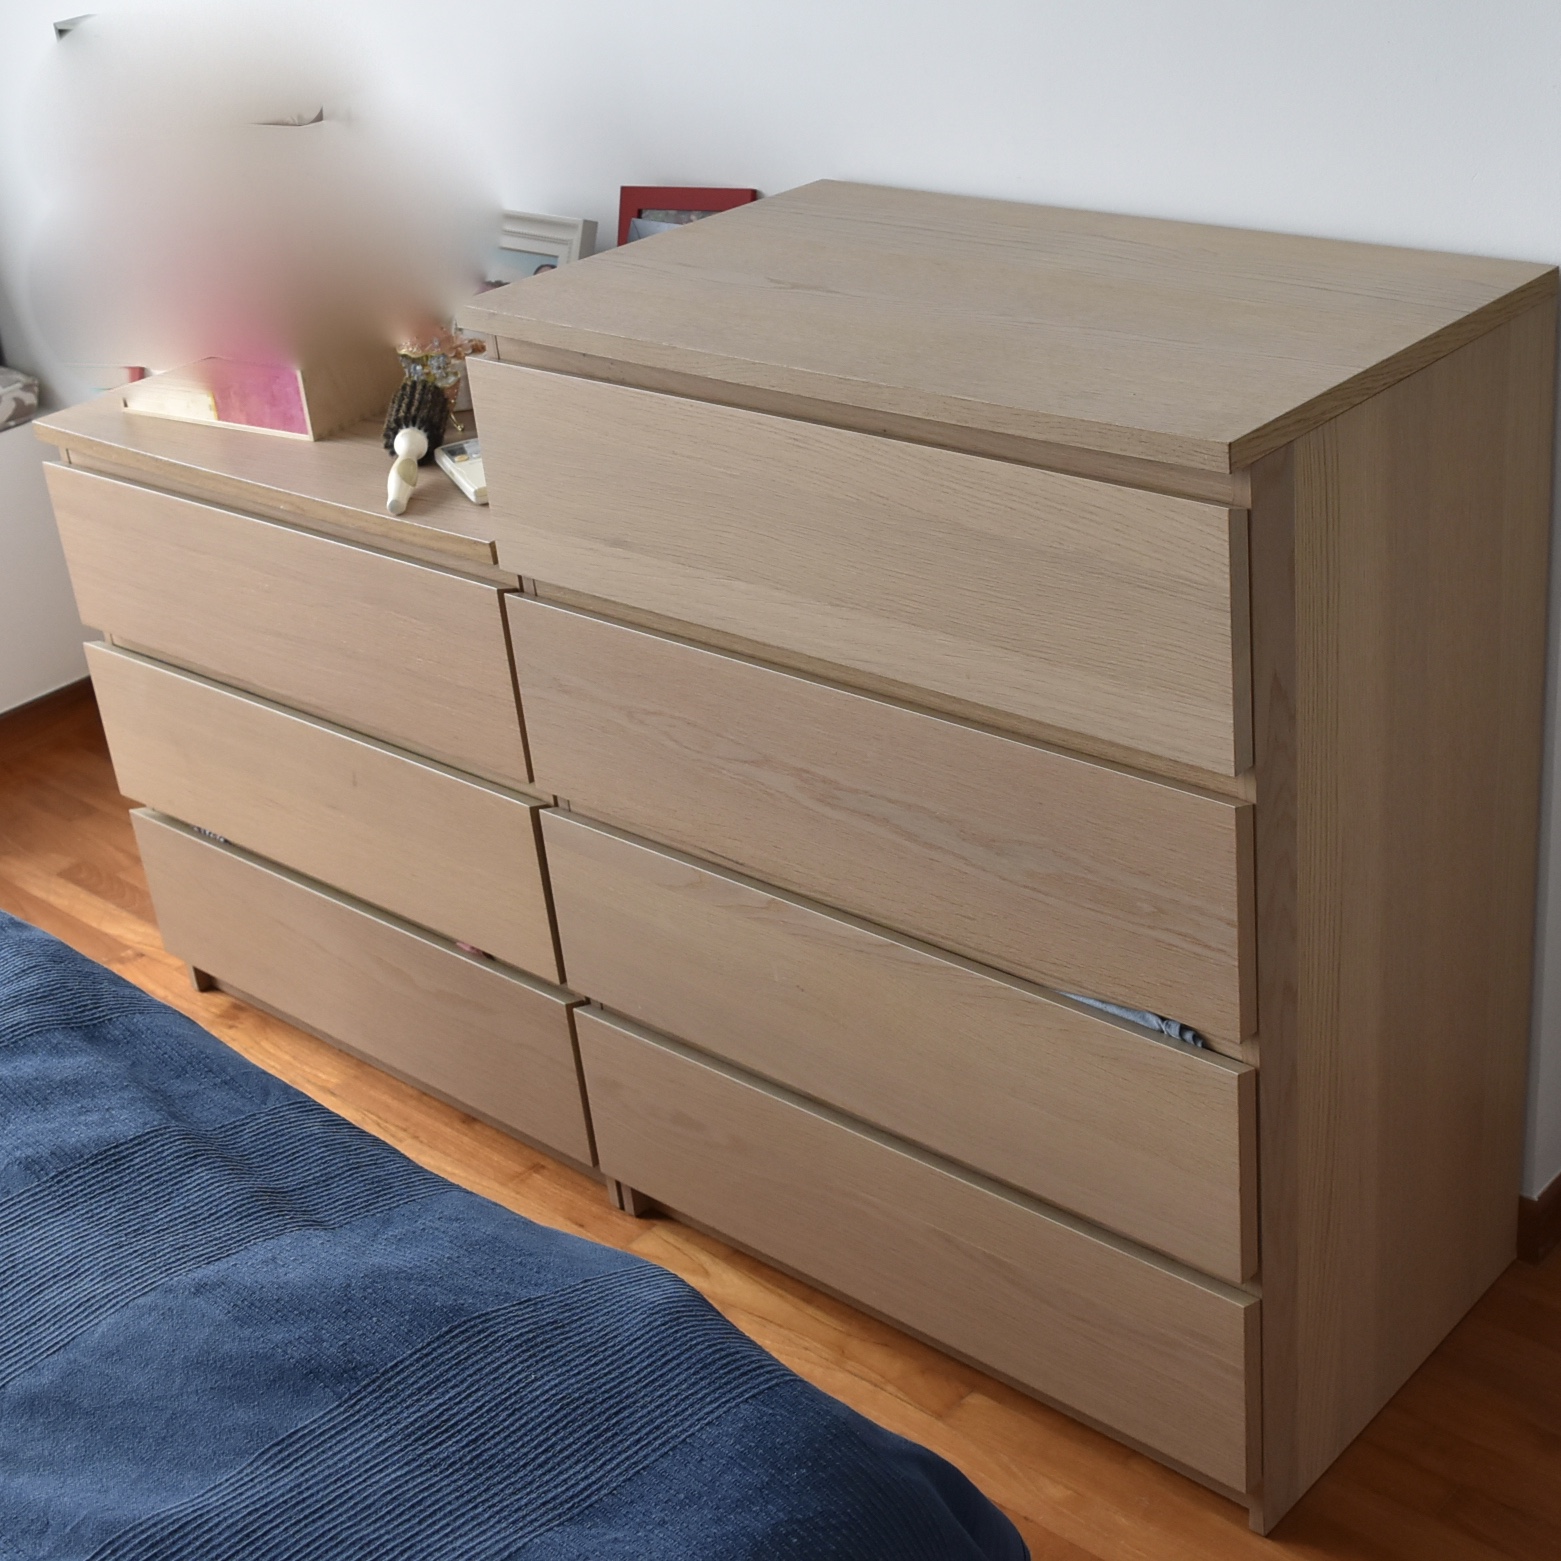 Malm 3 And 4 Drawers Ikea Chest Of Drawers Furniture Shelves